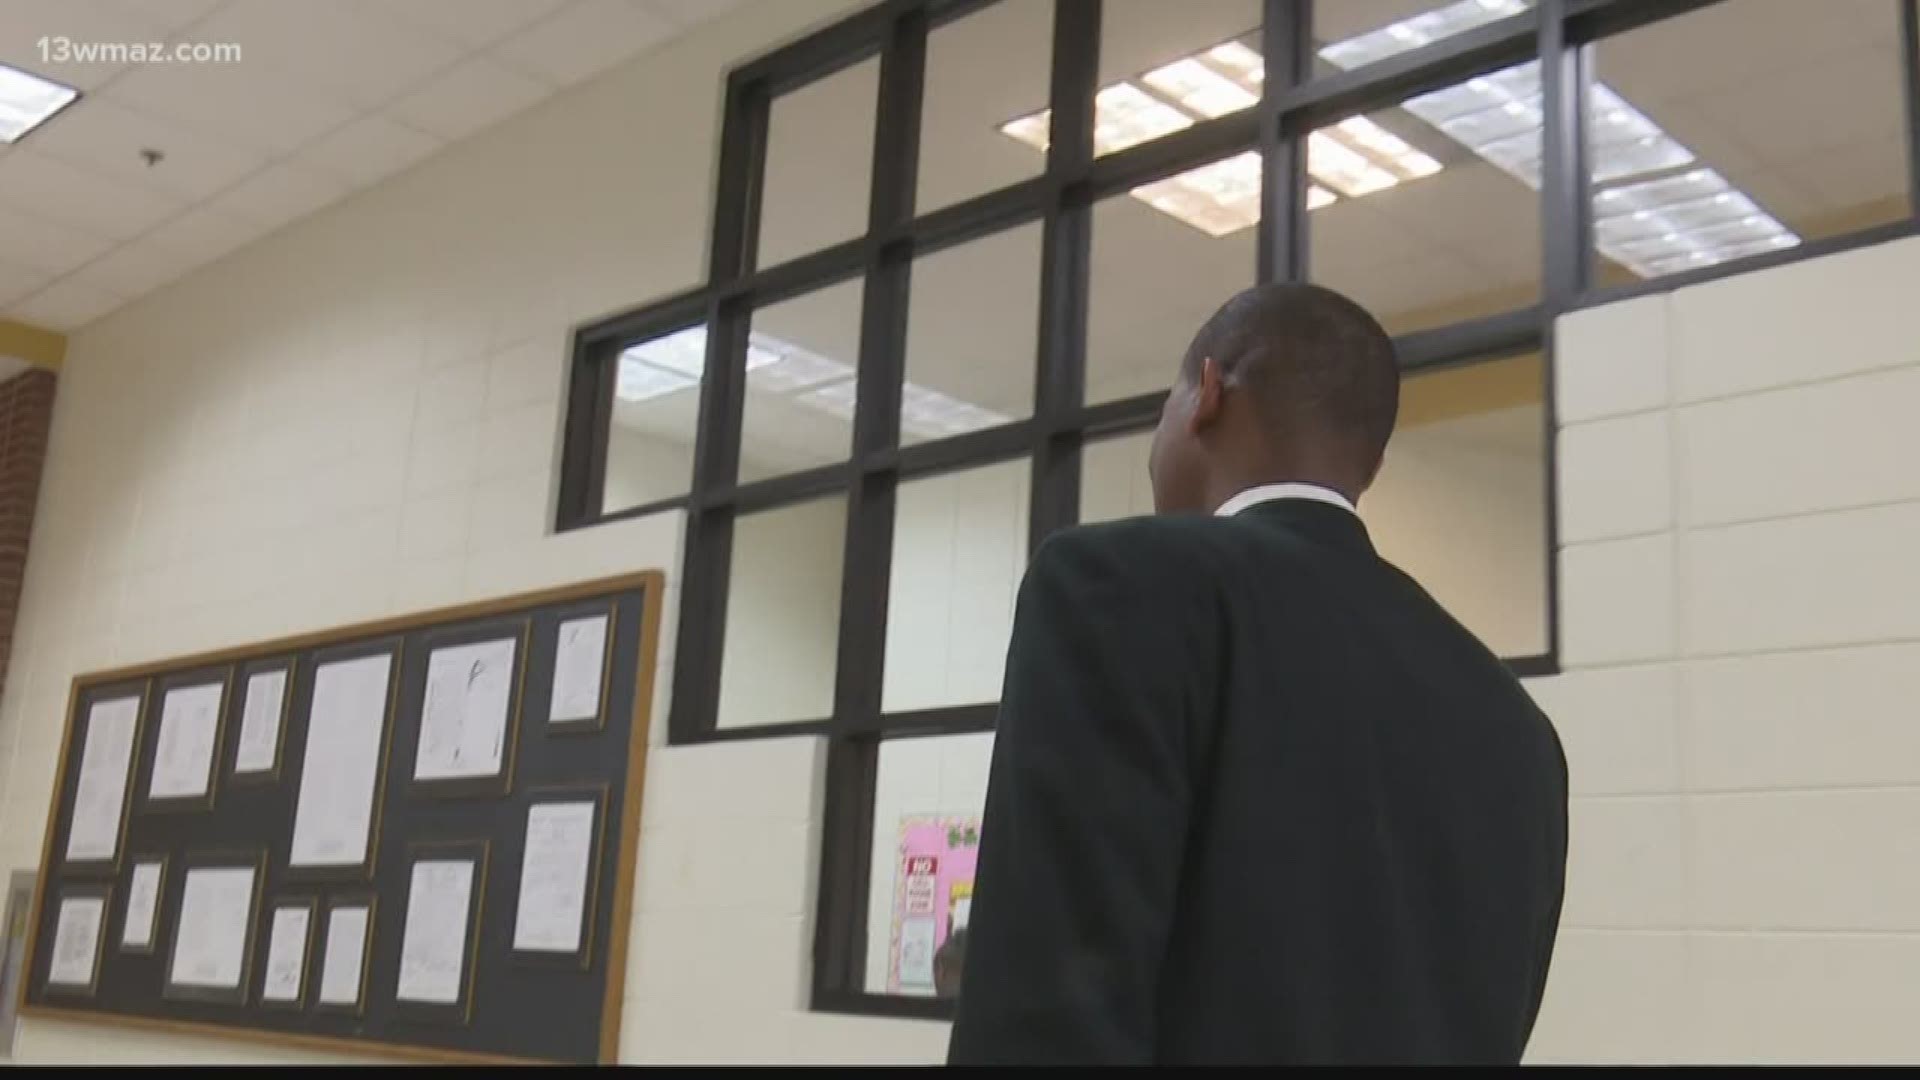 Jaroy Stuckey was born and raised in Dublin, and even graduated in 2006 from Dublin High School. Now he's returning to the school as a their new principal.